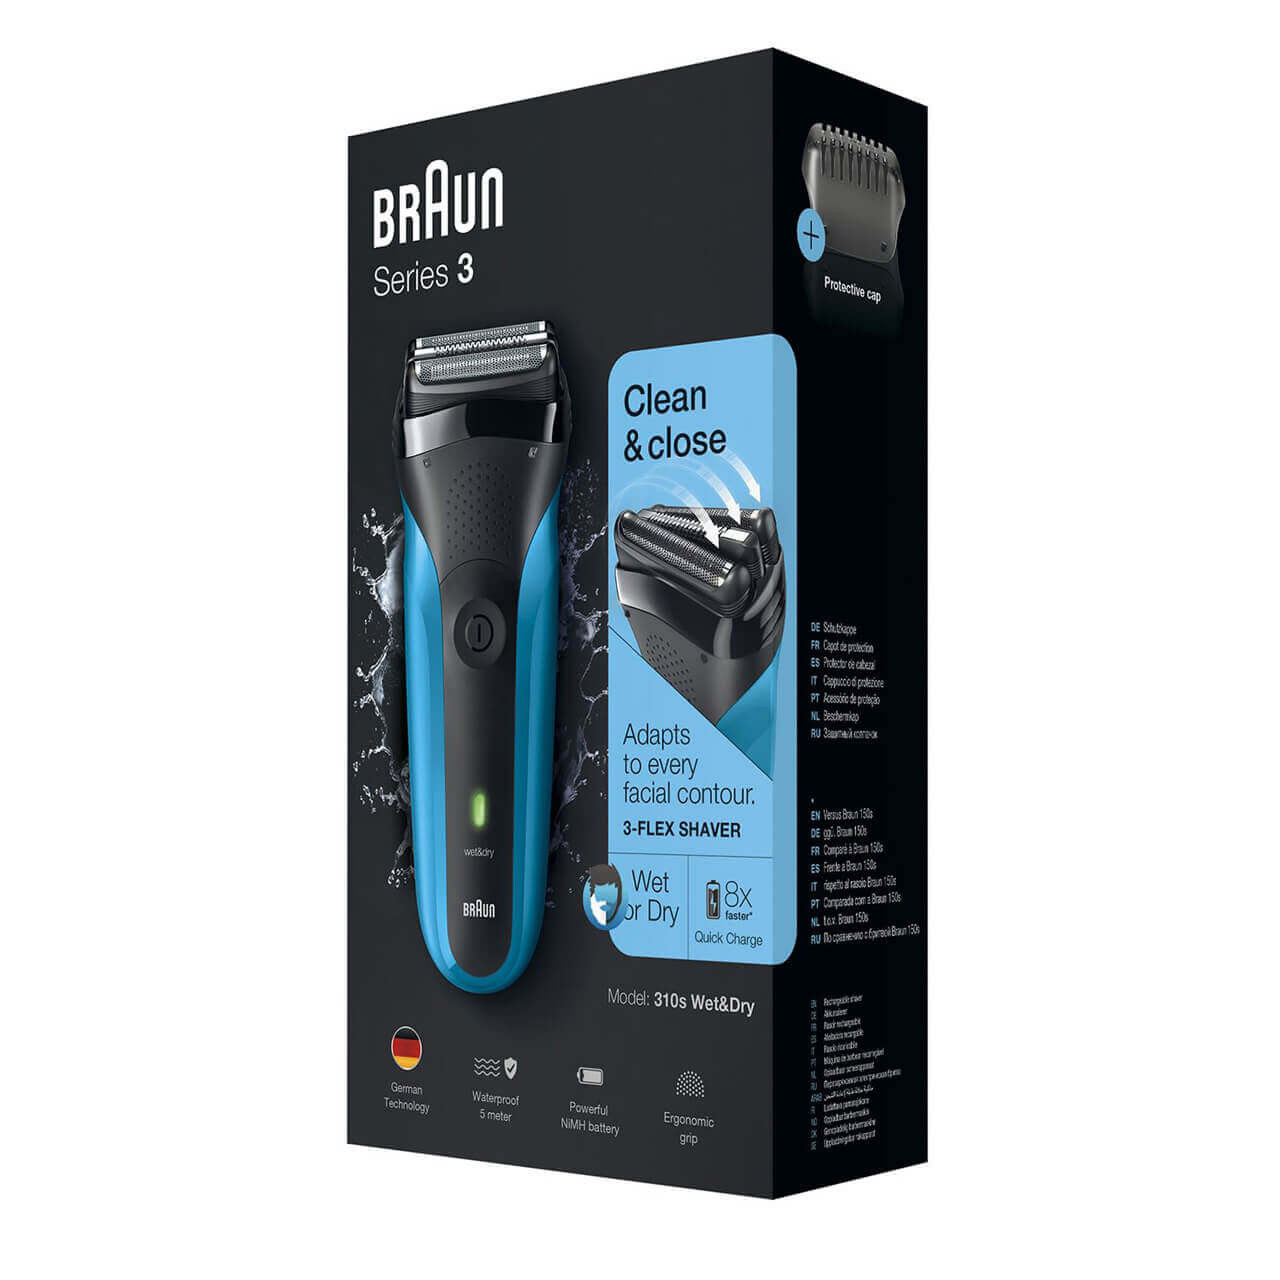 Braun Series 3 Shaver with Protection Cap, Blue